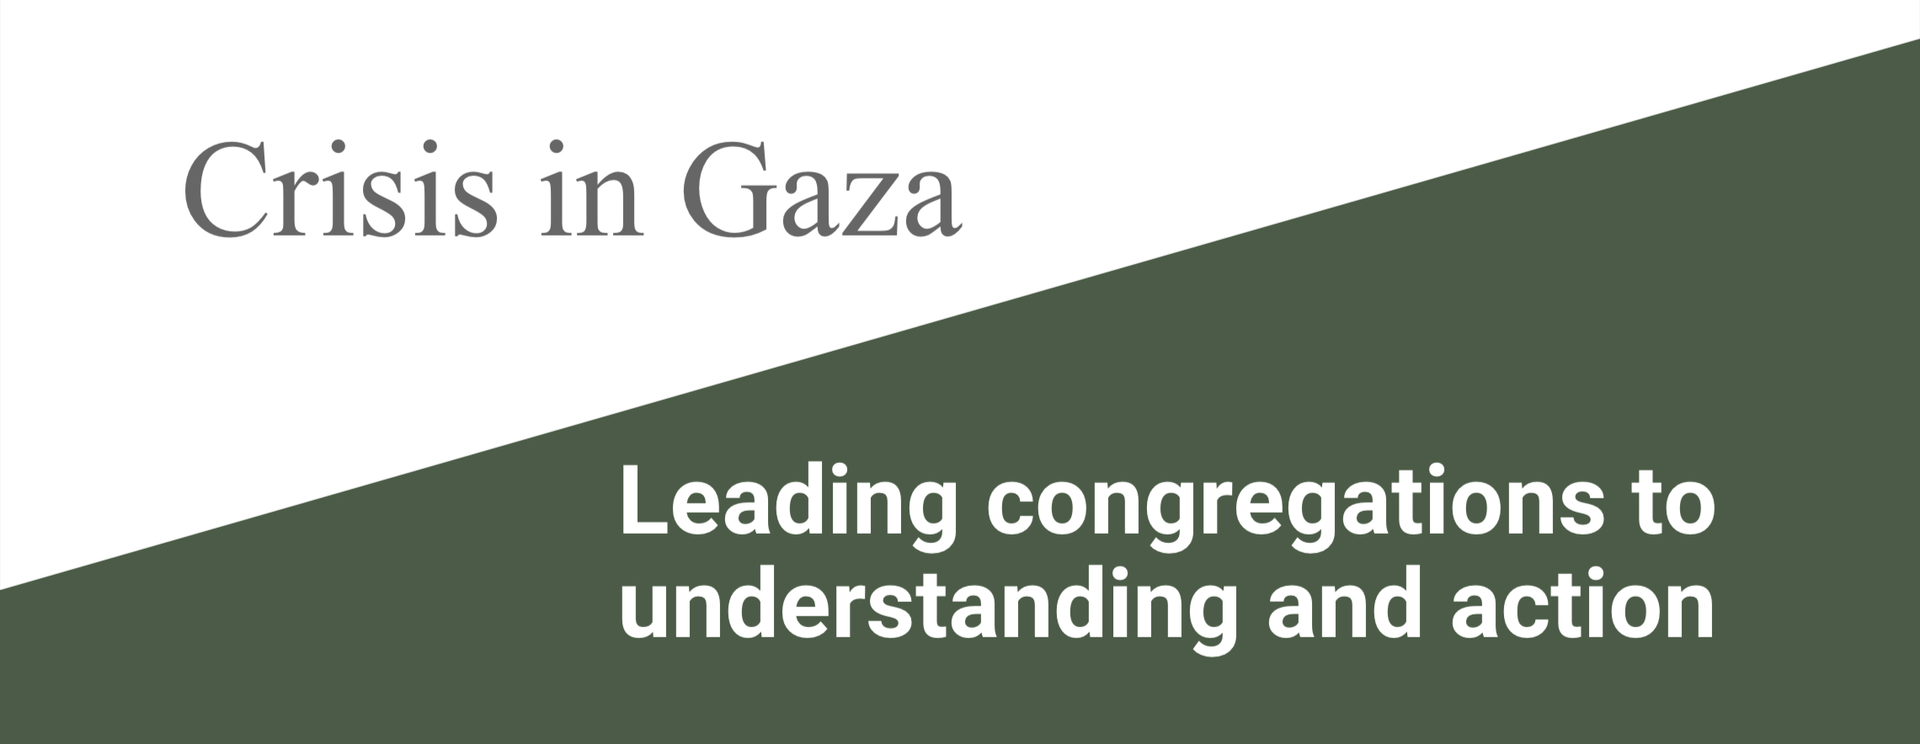 Download the Crisis in Gaza - Clergy Primer